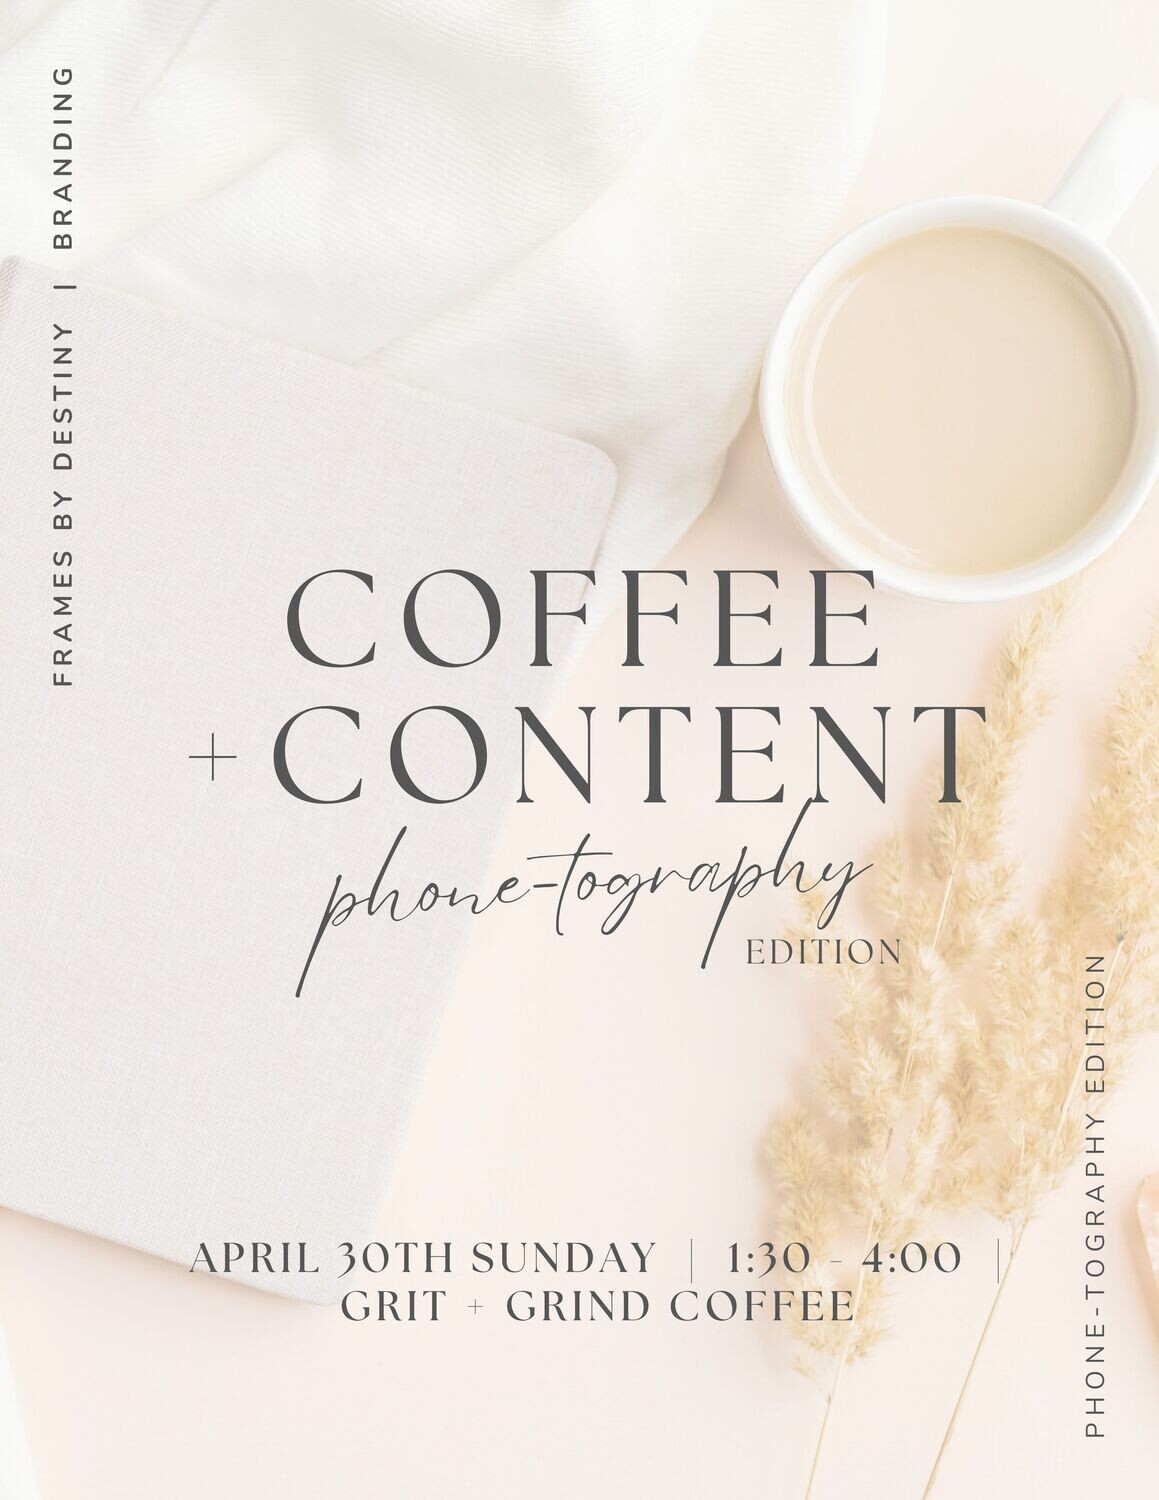 COFFEE + CONTENT - Phone-tography edition - April 30th Sunday